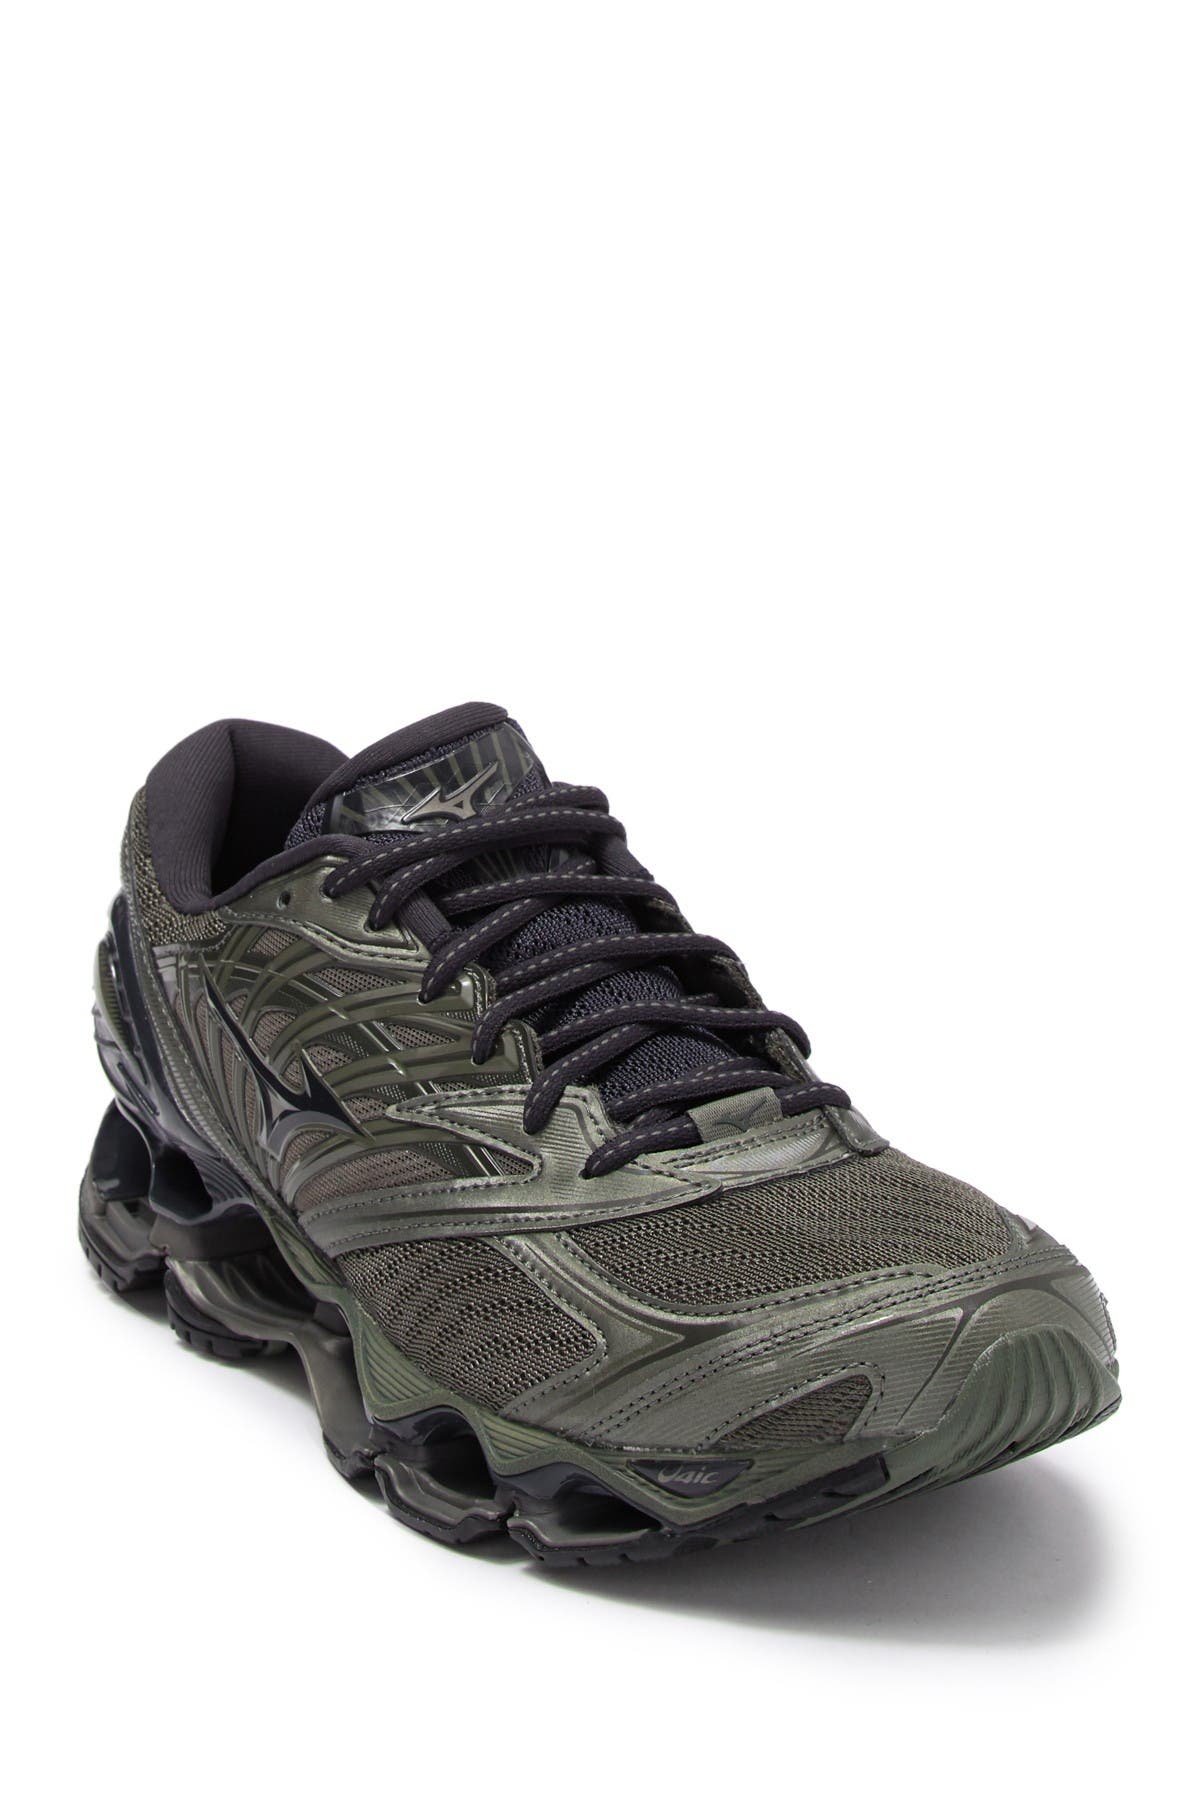 mizuno wave prophecy running shoes